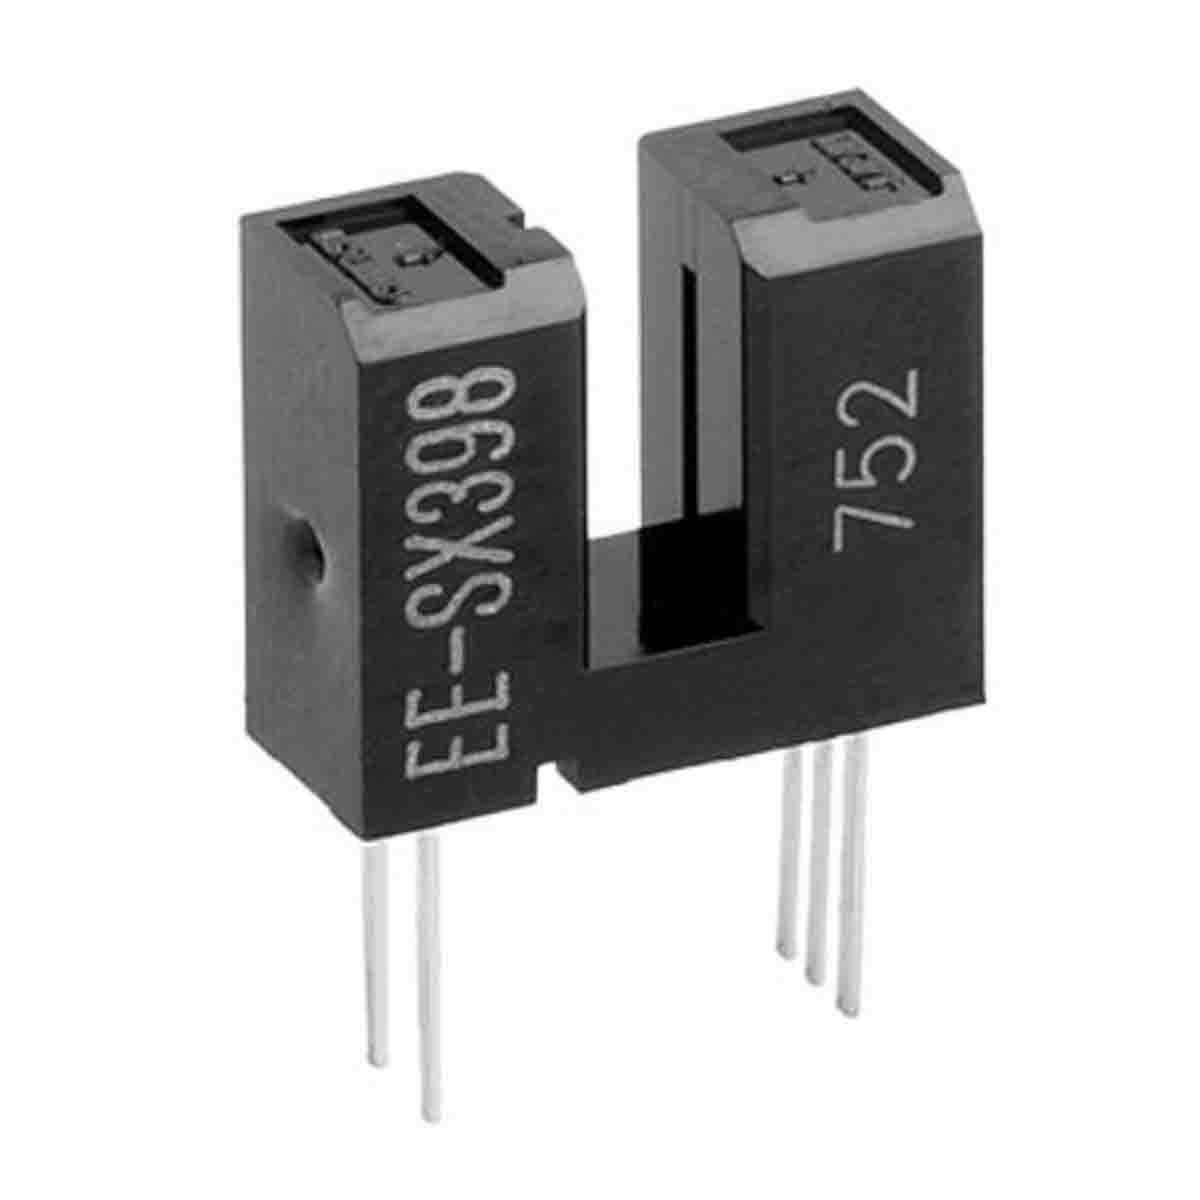 EE-SX398 Omron, Through Hole Slotted Optical Switch, Photo IC Output